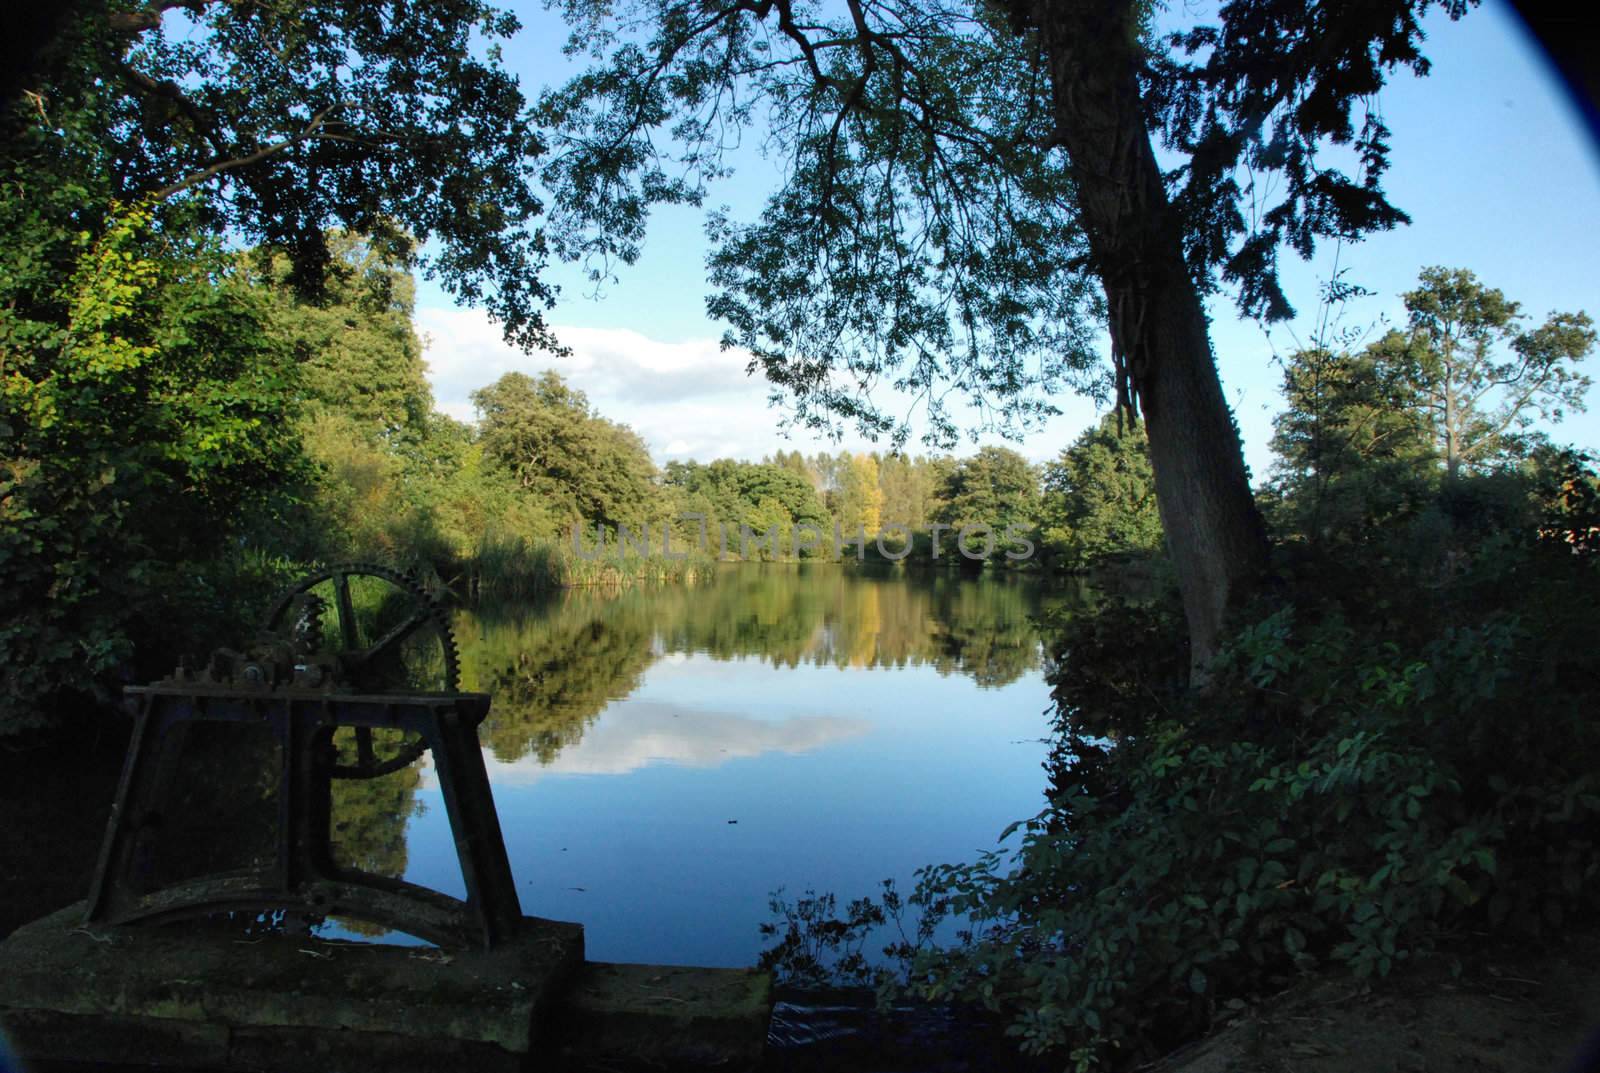 Hothfield Lake created in 1851 in Kent